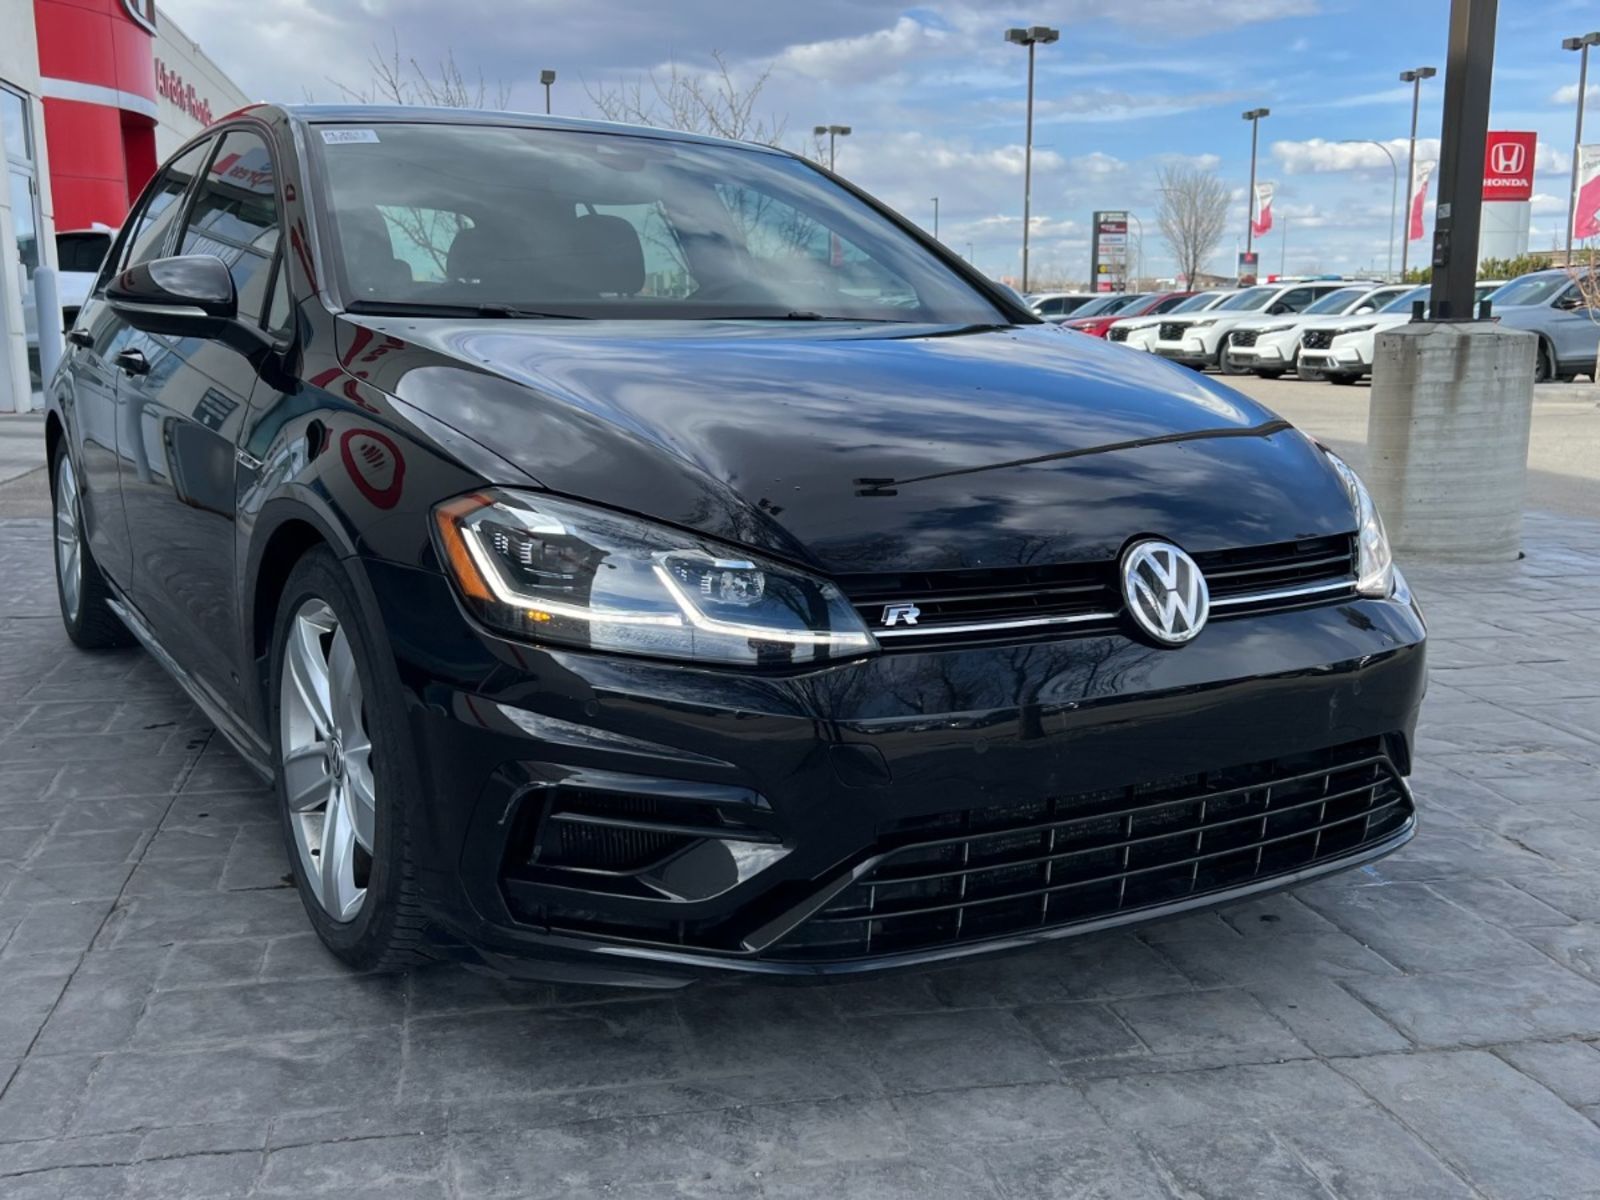 2019 Volkswagen Golf R Golf R: No Accidents, Local Vehicle 2 Sets of tire